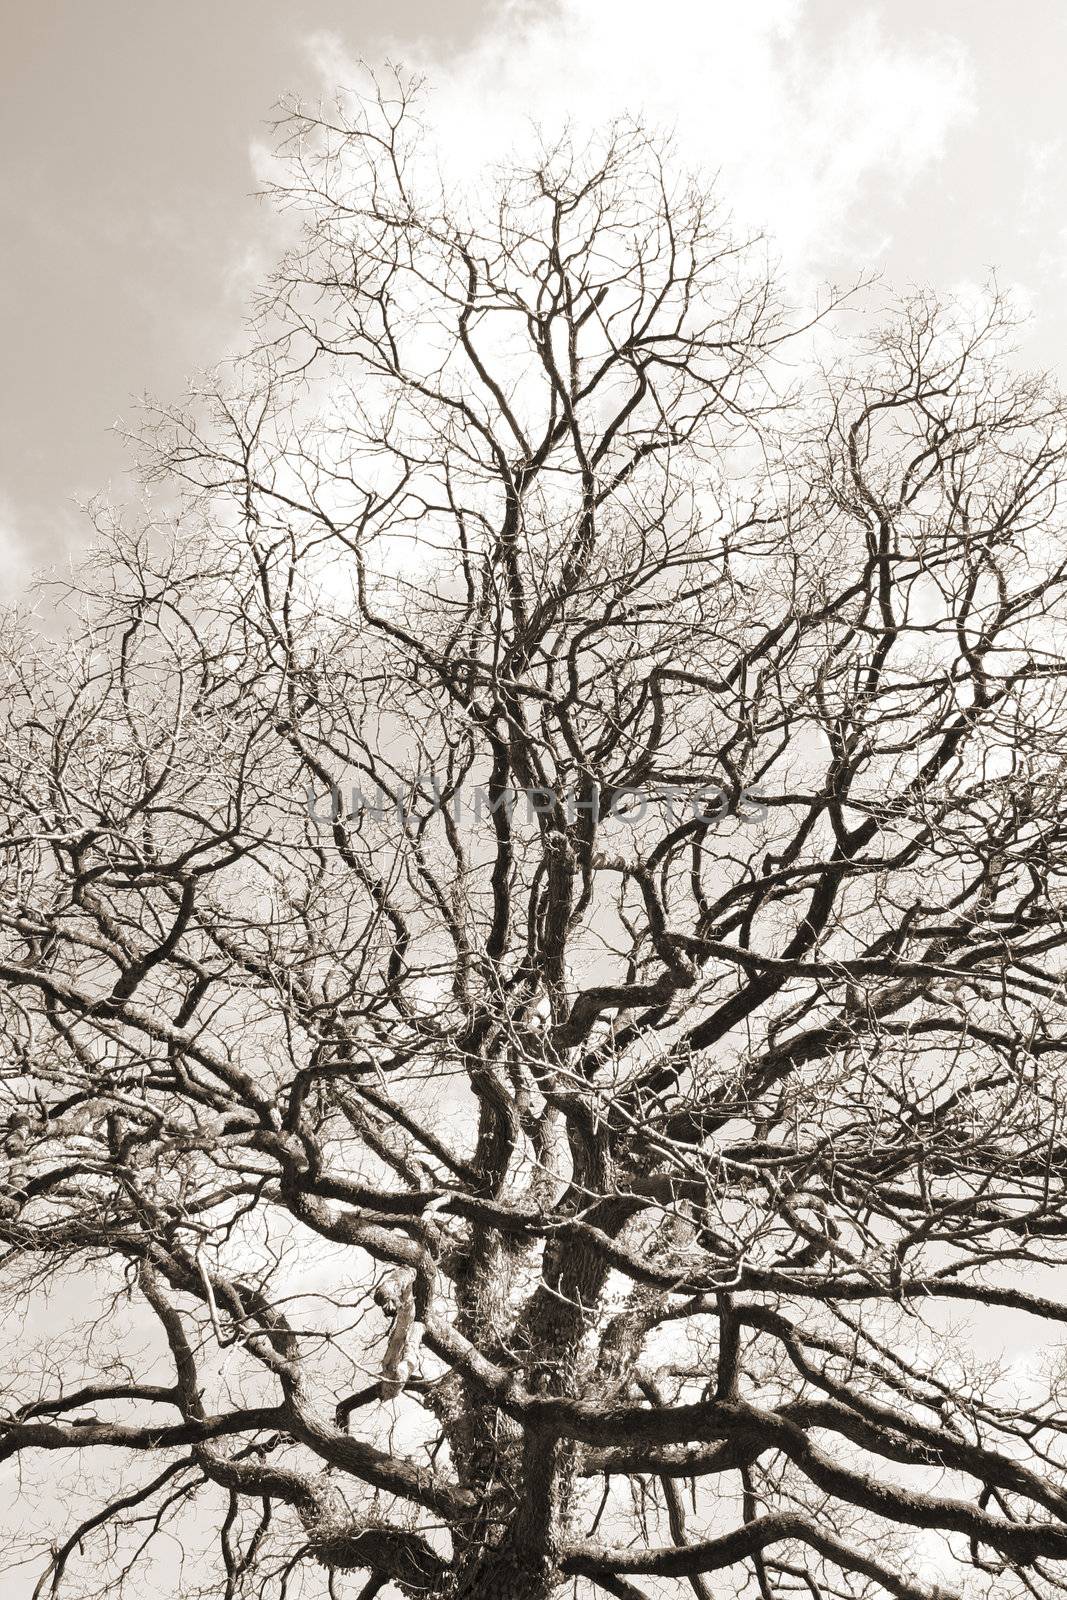 tree showing off its branches shown as a sepia tone picture